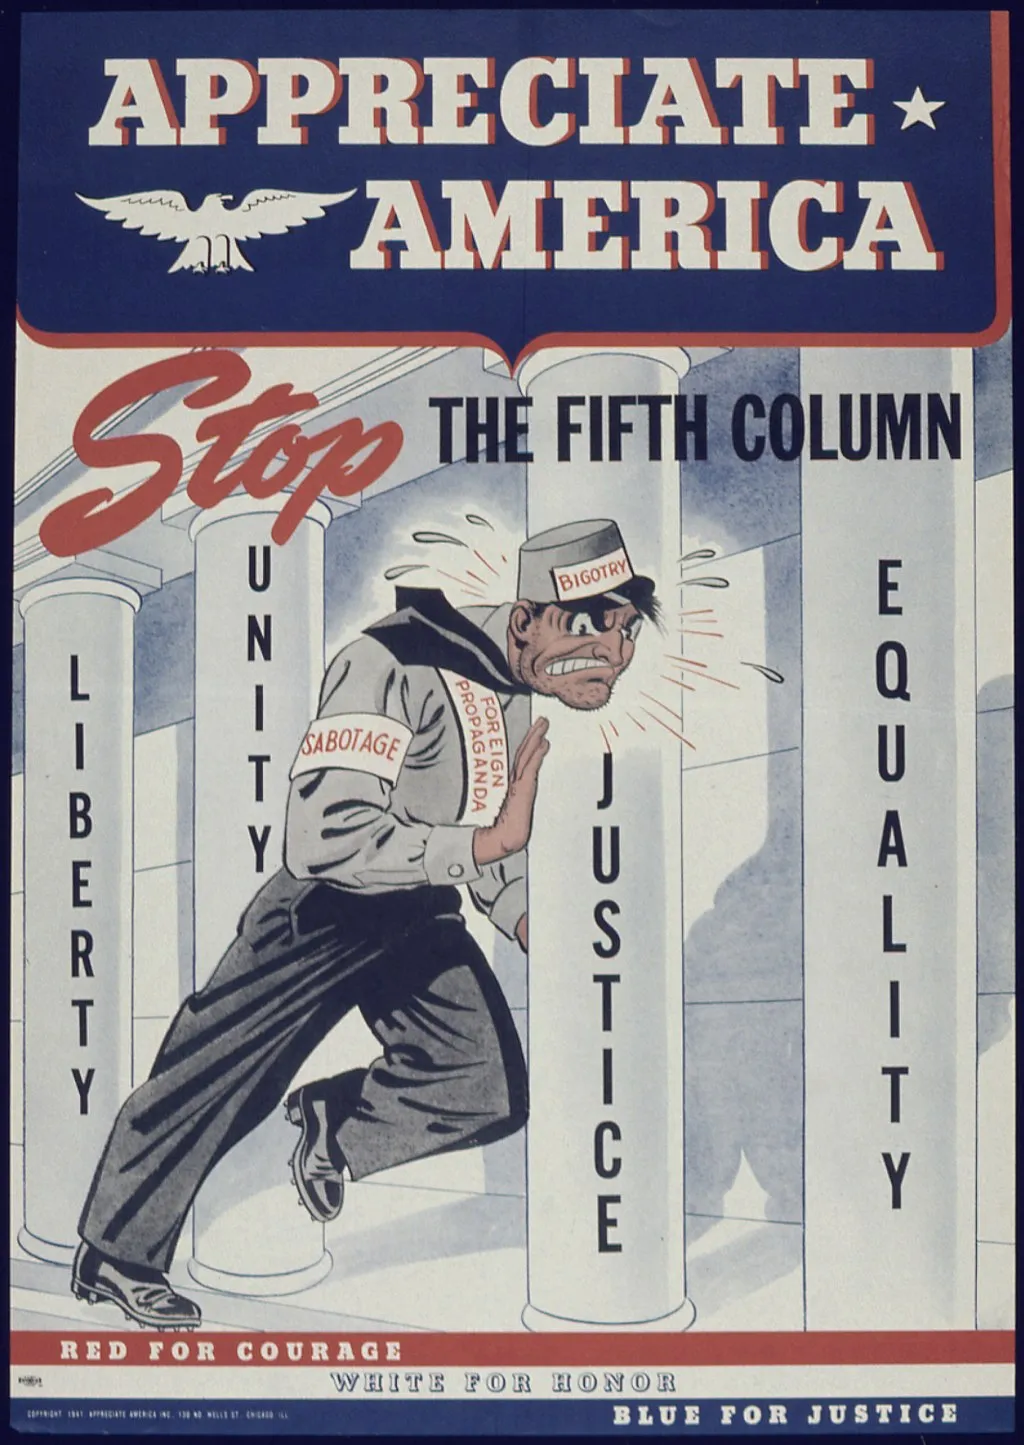 WWII propaganda poster about the fifth column